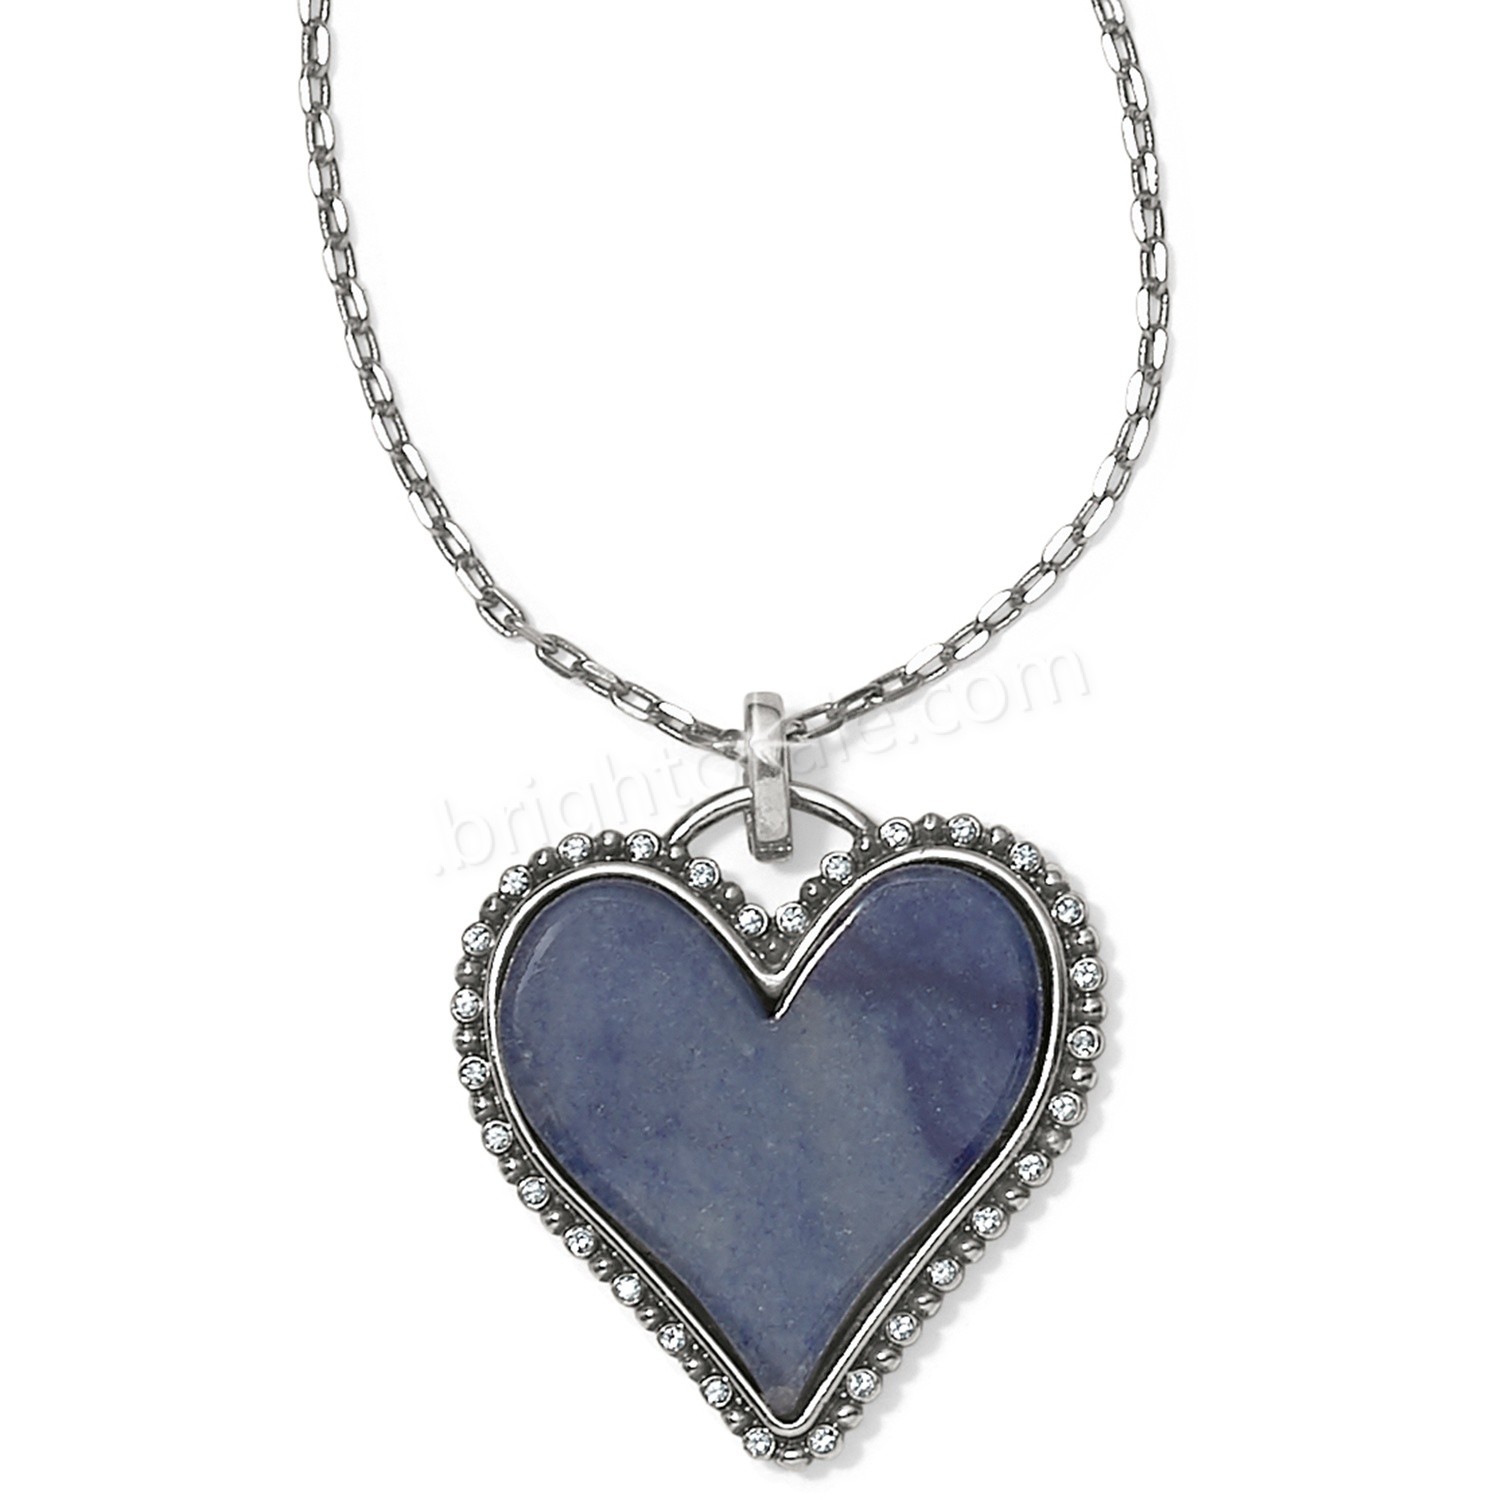 Brighton Collectibles & Online Discount Twinkle Amor Necklace - Brighton Collectibles & Online Discount Twinkle Amor Necklace